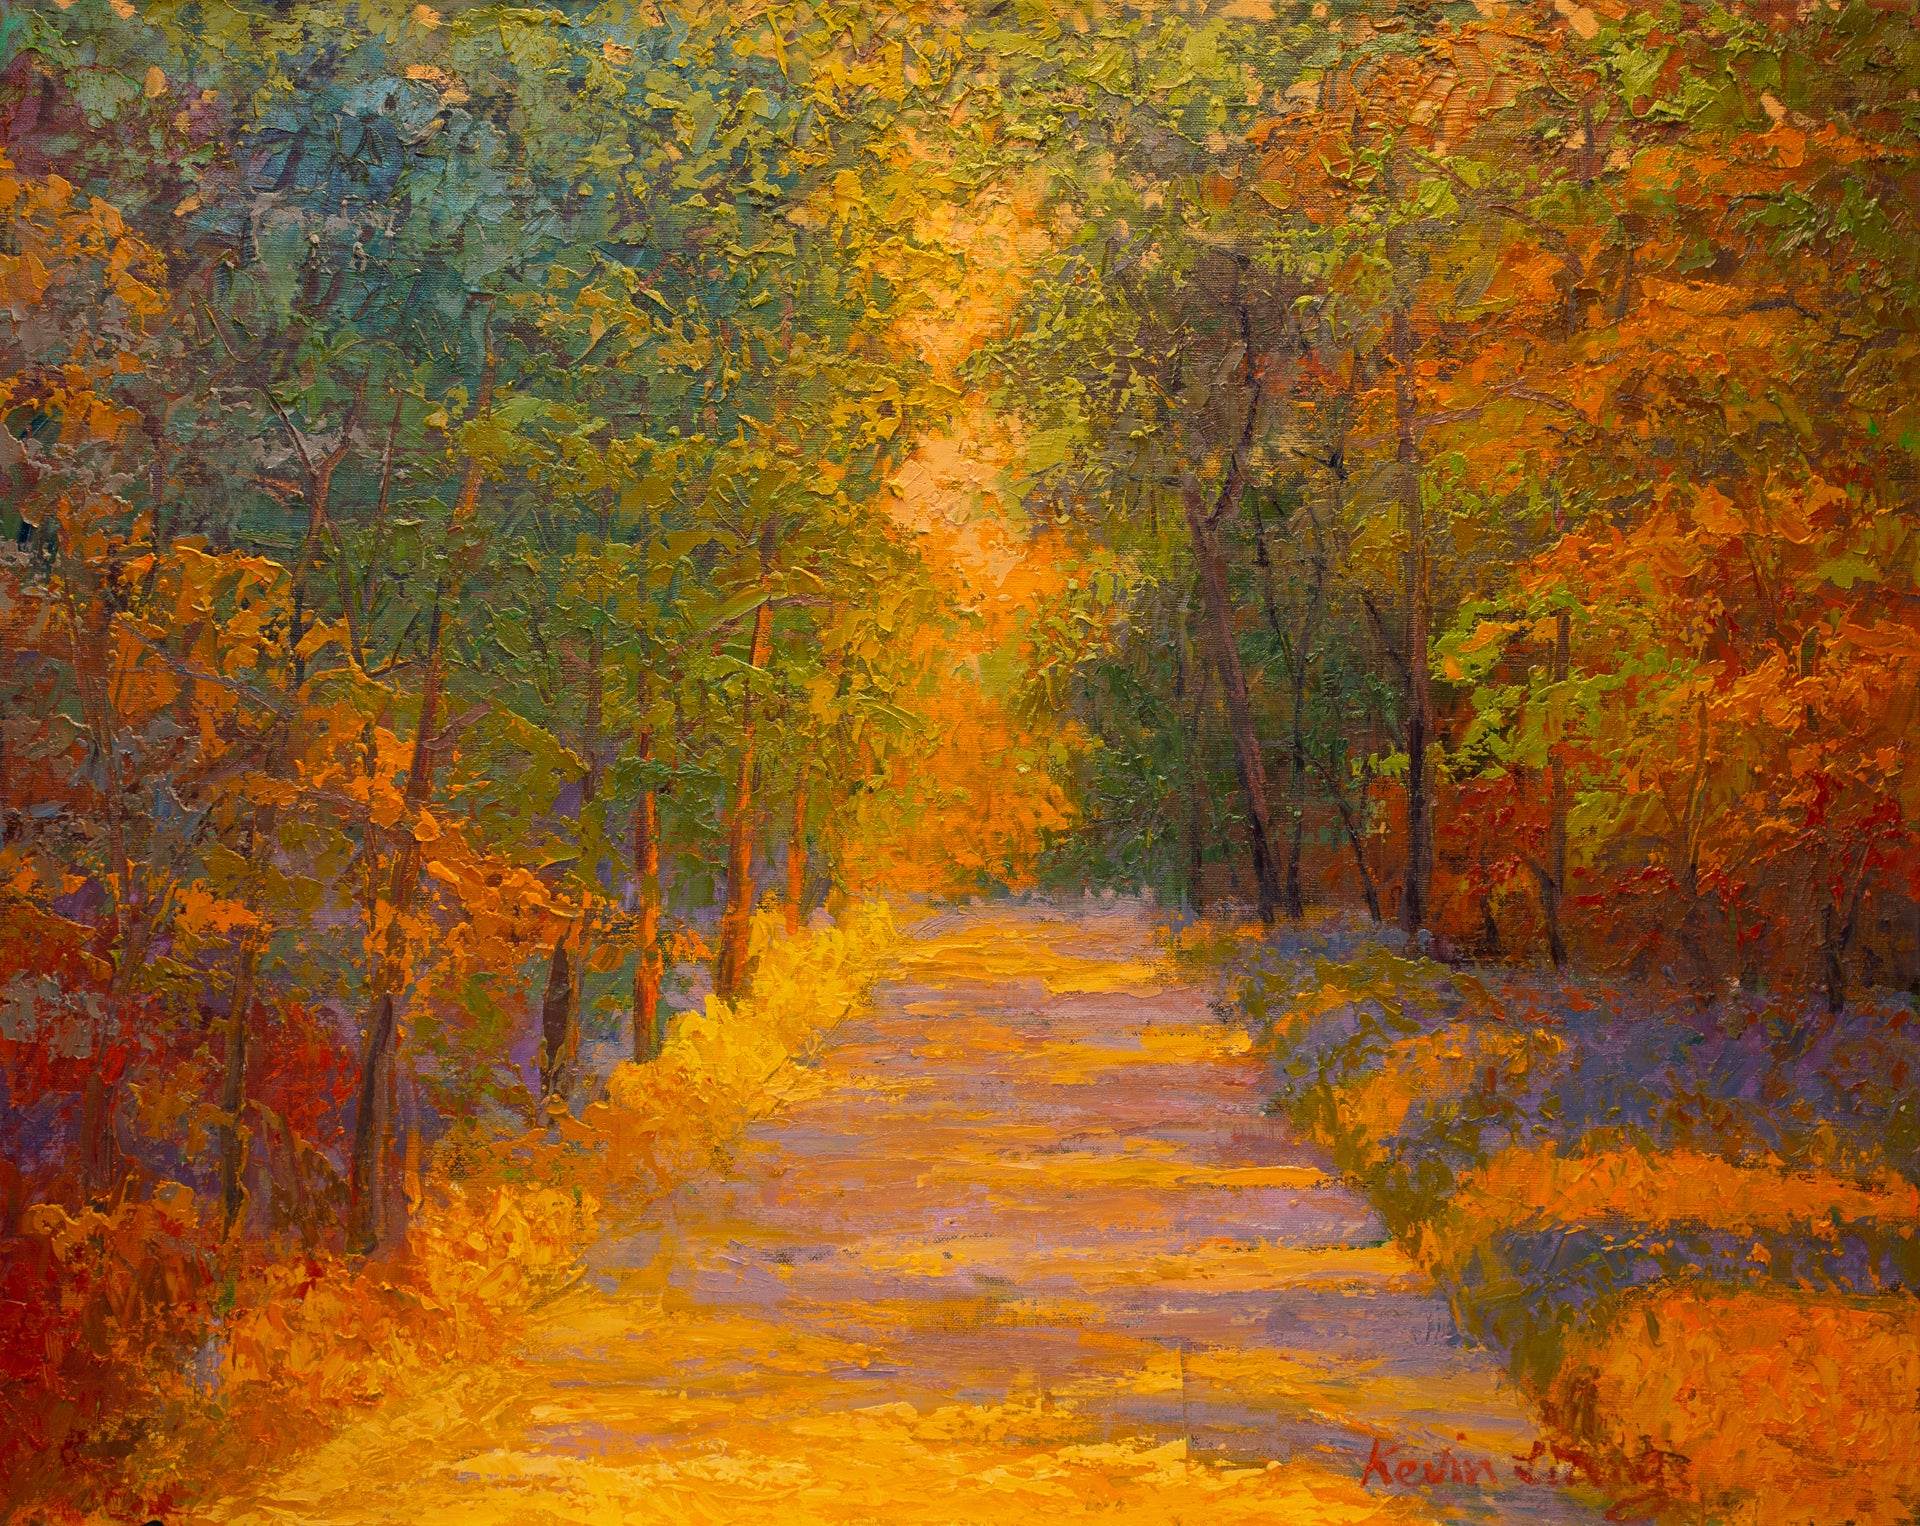 Golden Moment, oil on canvas 25"x31"x1.5", 2022